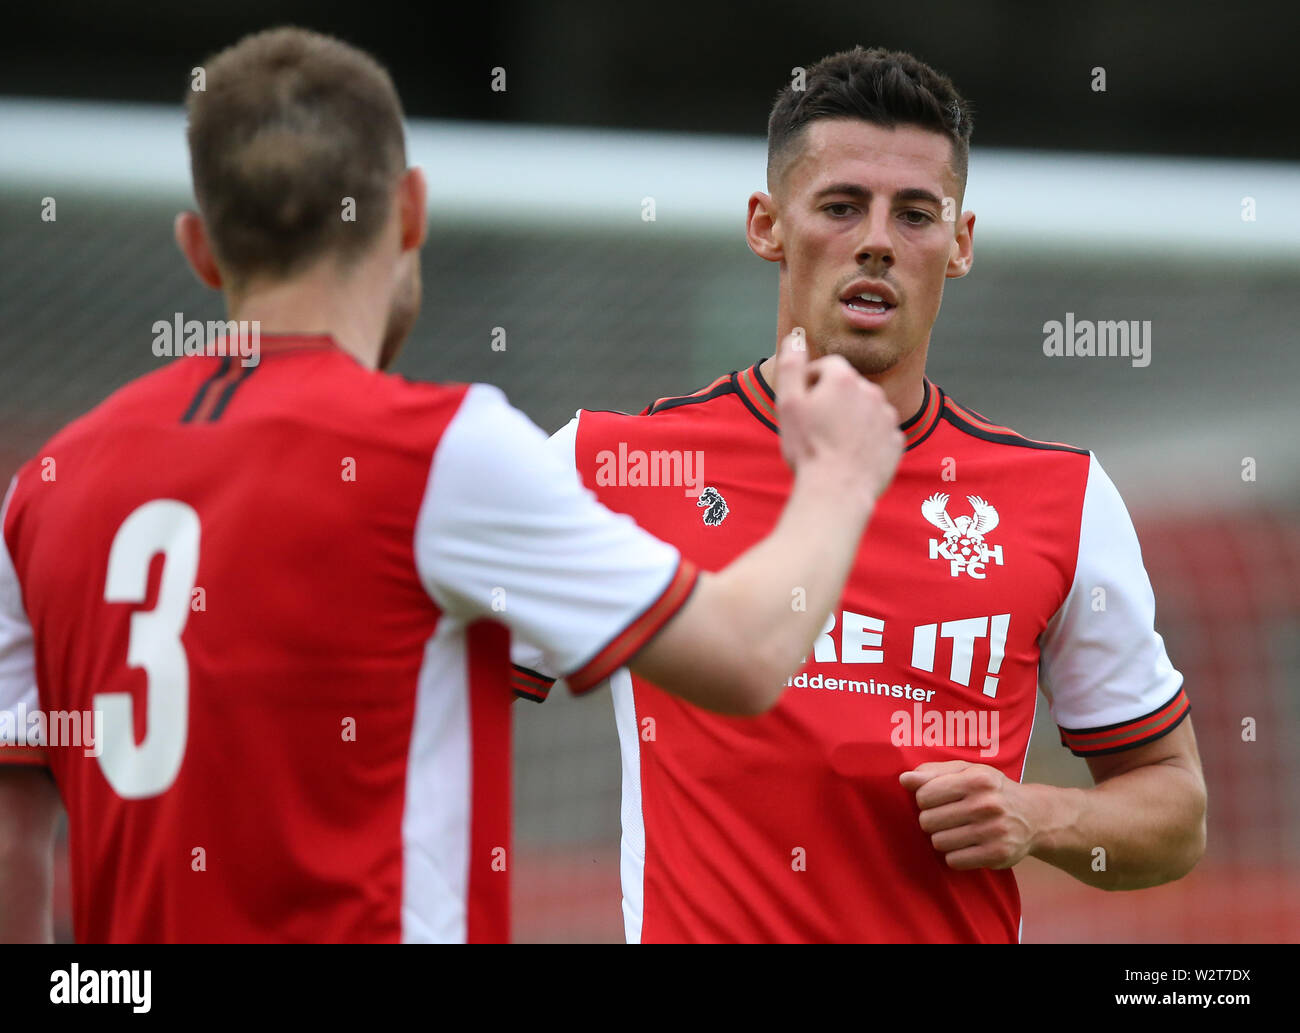 Kidderminster Harriers' Ed Williams (right) celebrates scoring his side's second goal of the game during the pre-season friendly at Aggborough Stadium, Kidderminster. Stock Photo